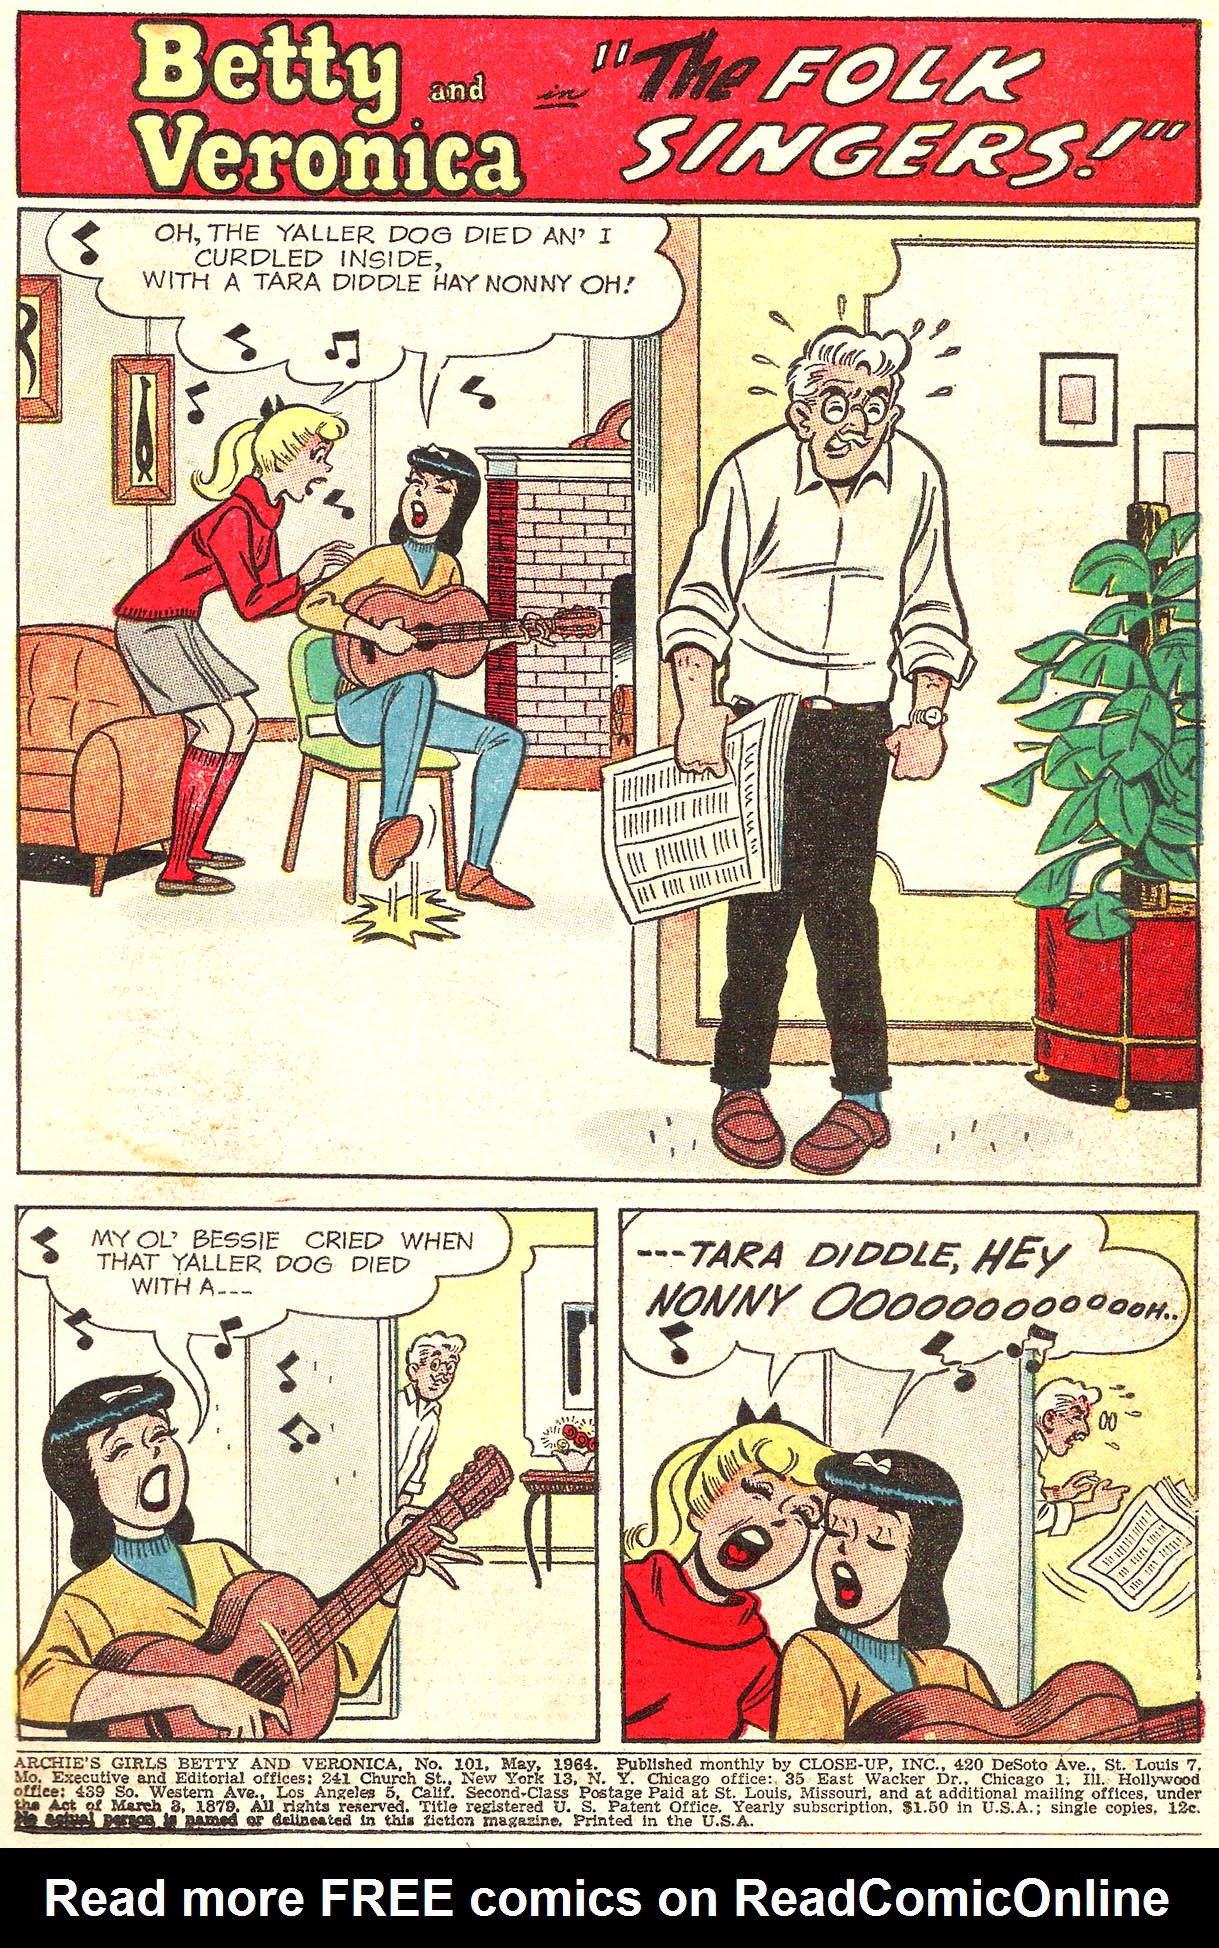 Read online Archie's Girls Betty and Veronica comic -  Issue #101 - 3